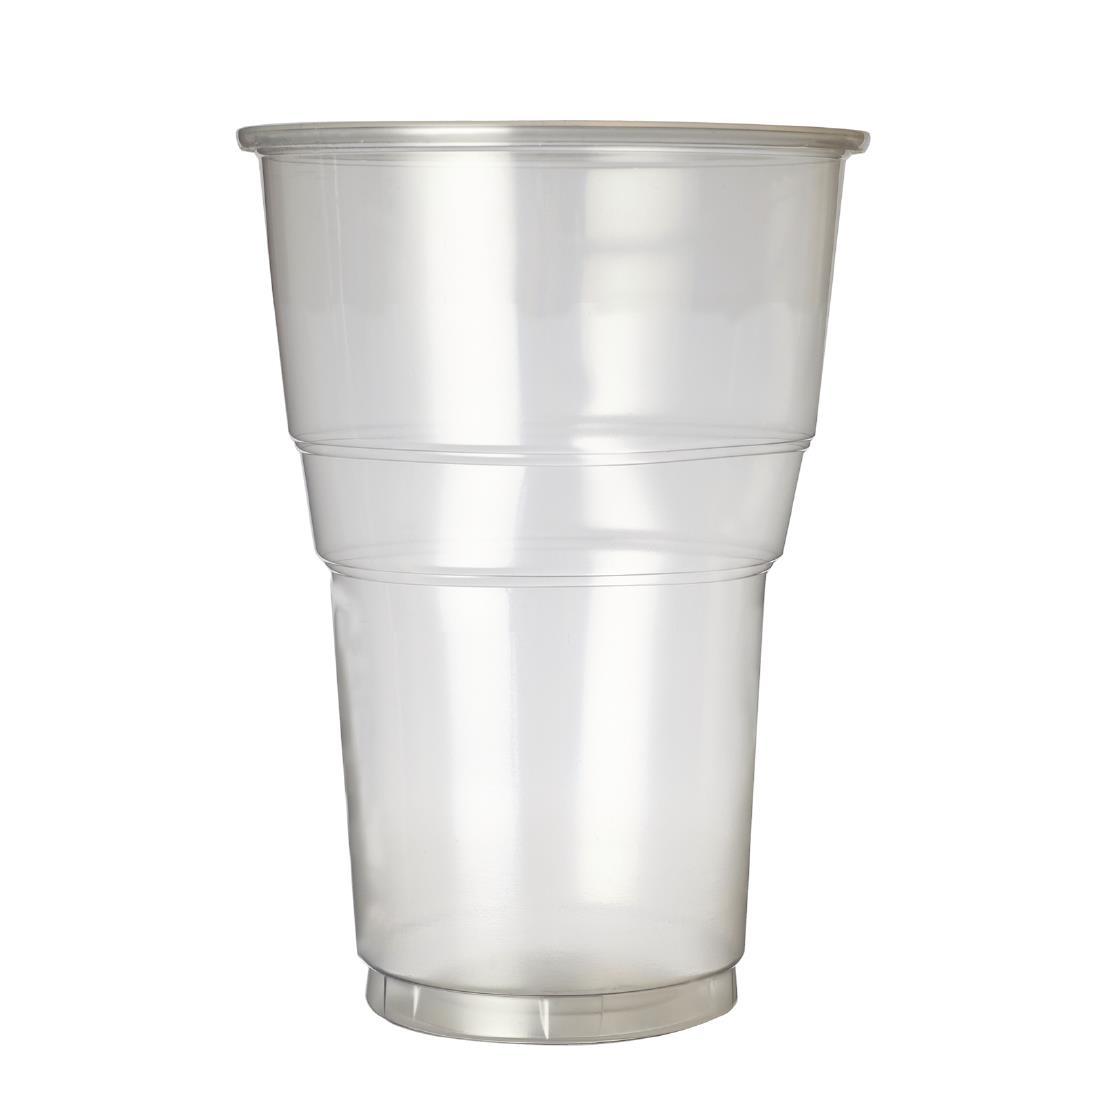 eGreen Premium Disposable Pint Glass CE Marked 568ml (Pack of 1000) - CP891  - 1